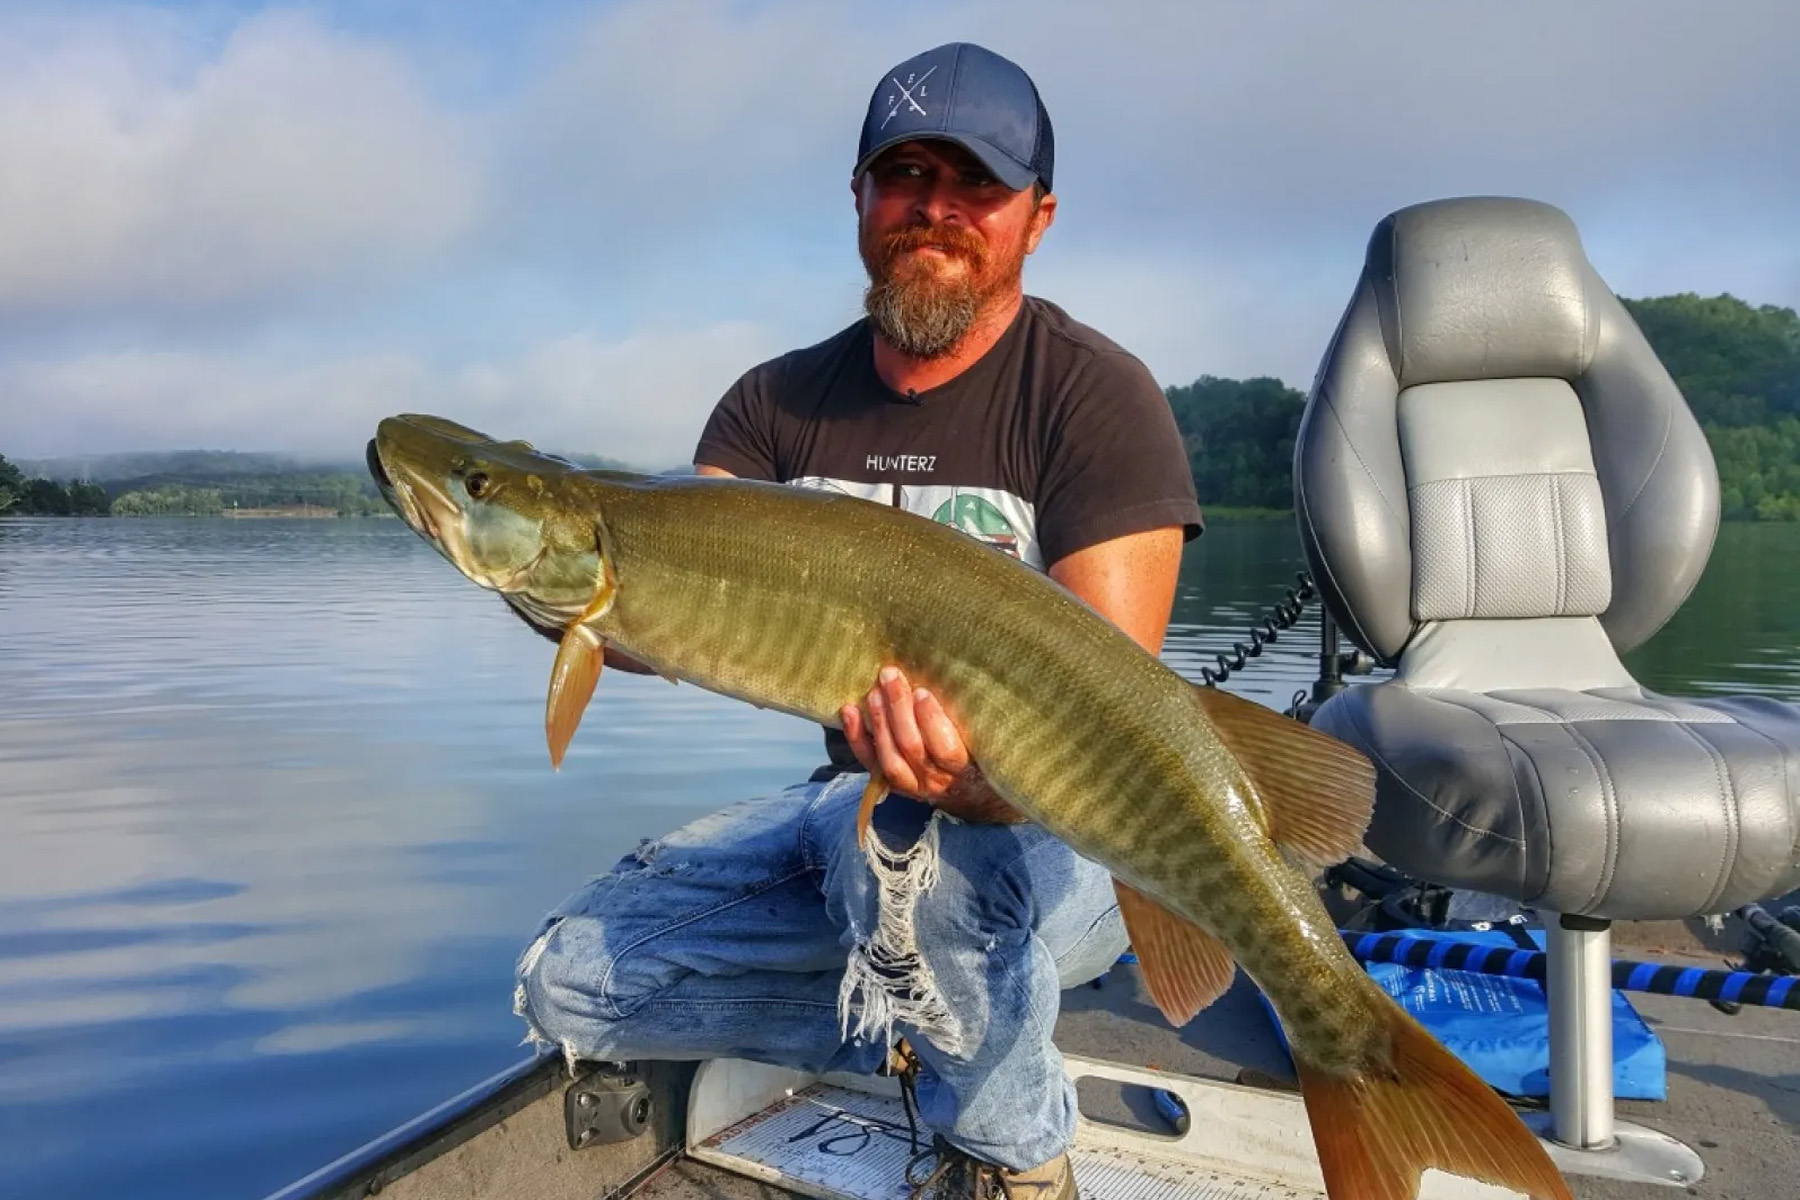 Fishing for Northern, but my boat mate reeled in this Muskie. Fish